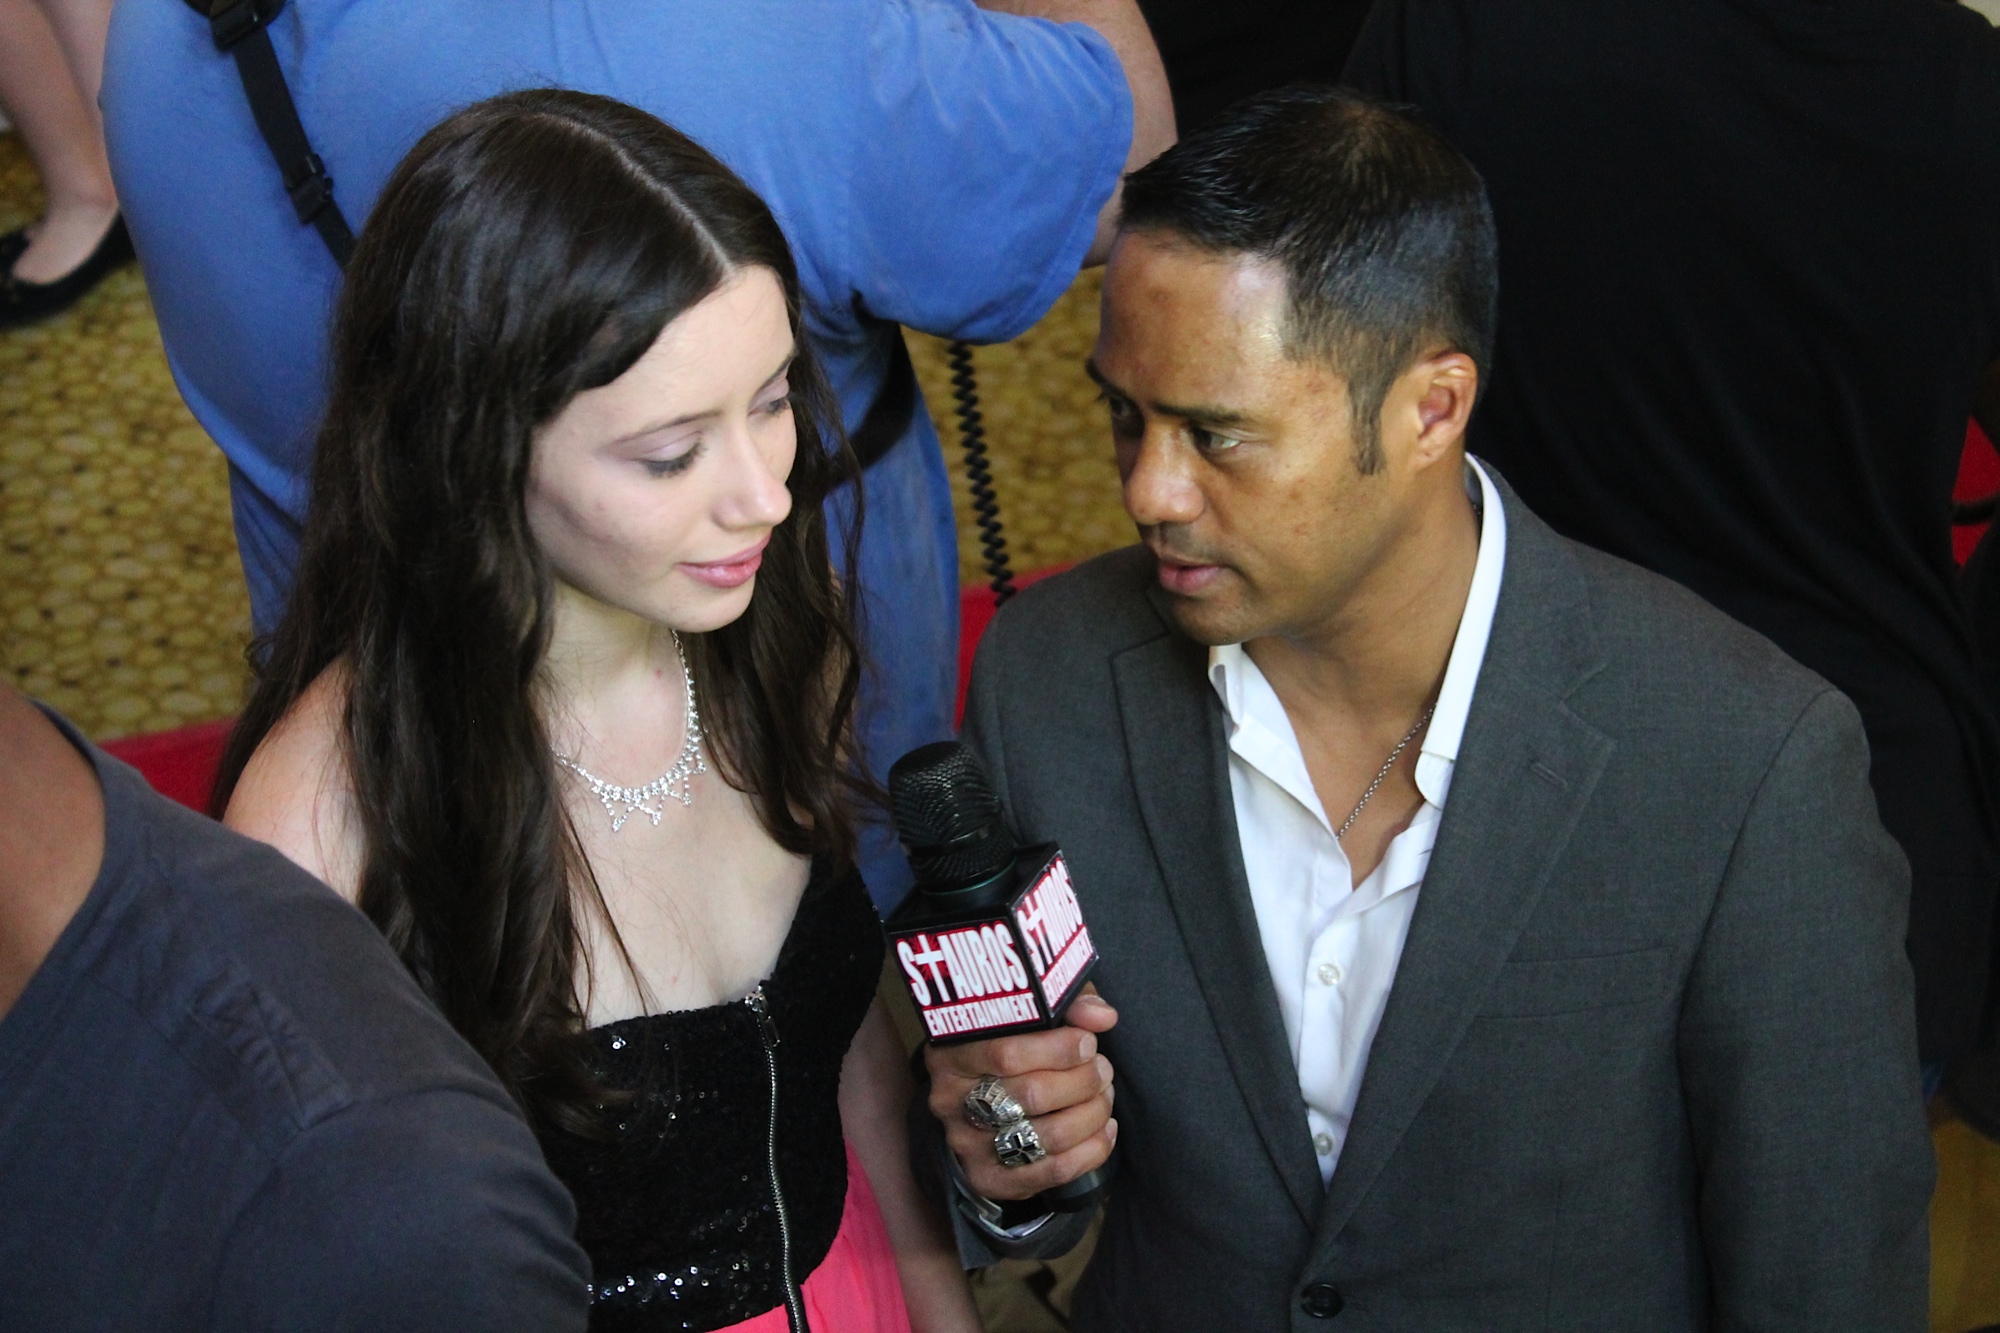 Janette Bundic interviewed by Stauros Entertainment at the 2015 Young Artist Awards in LA